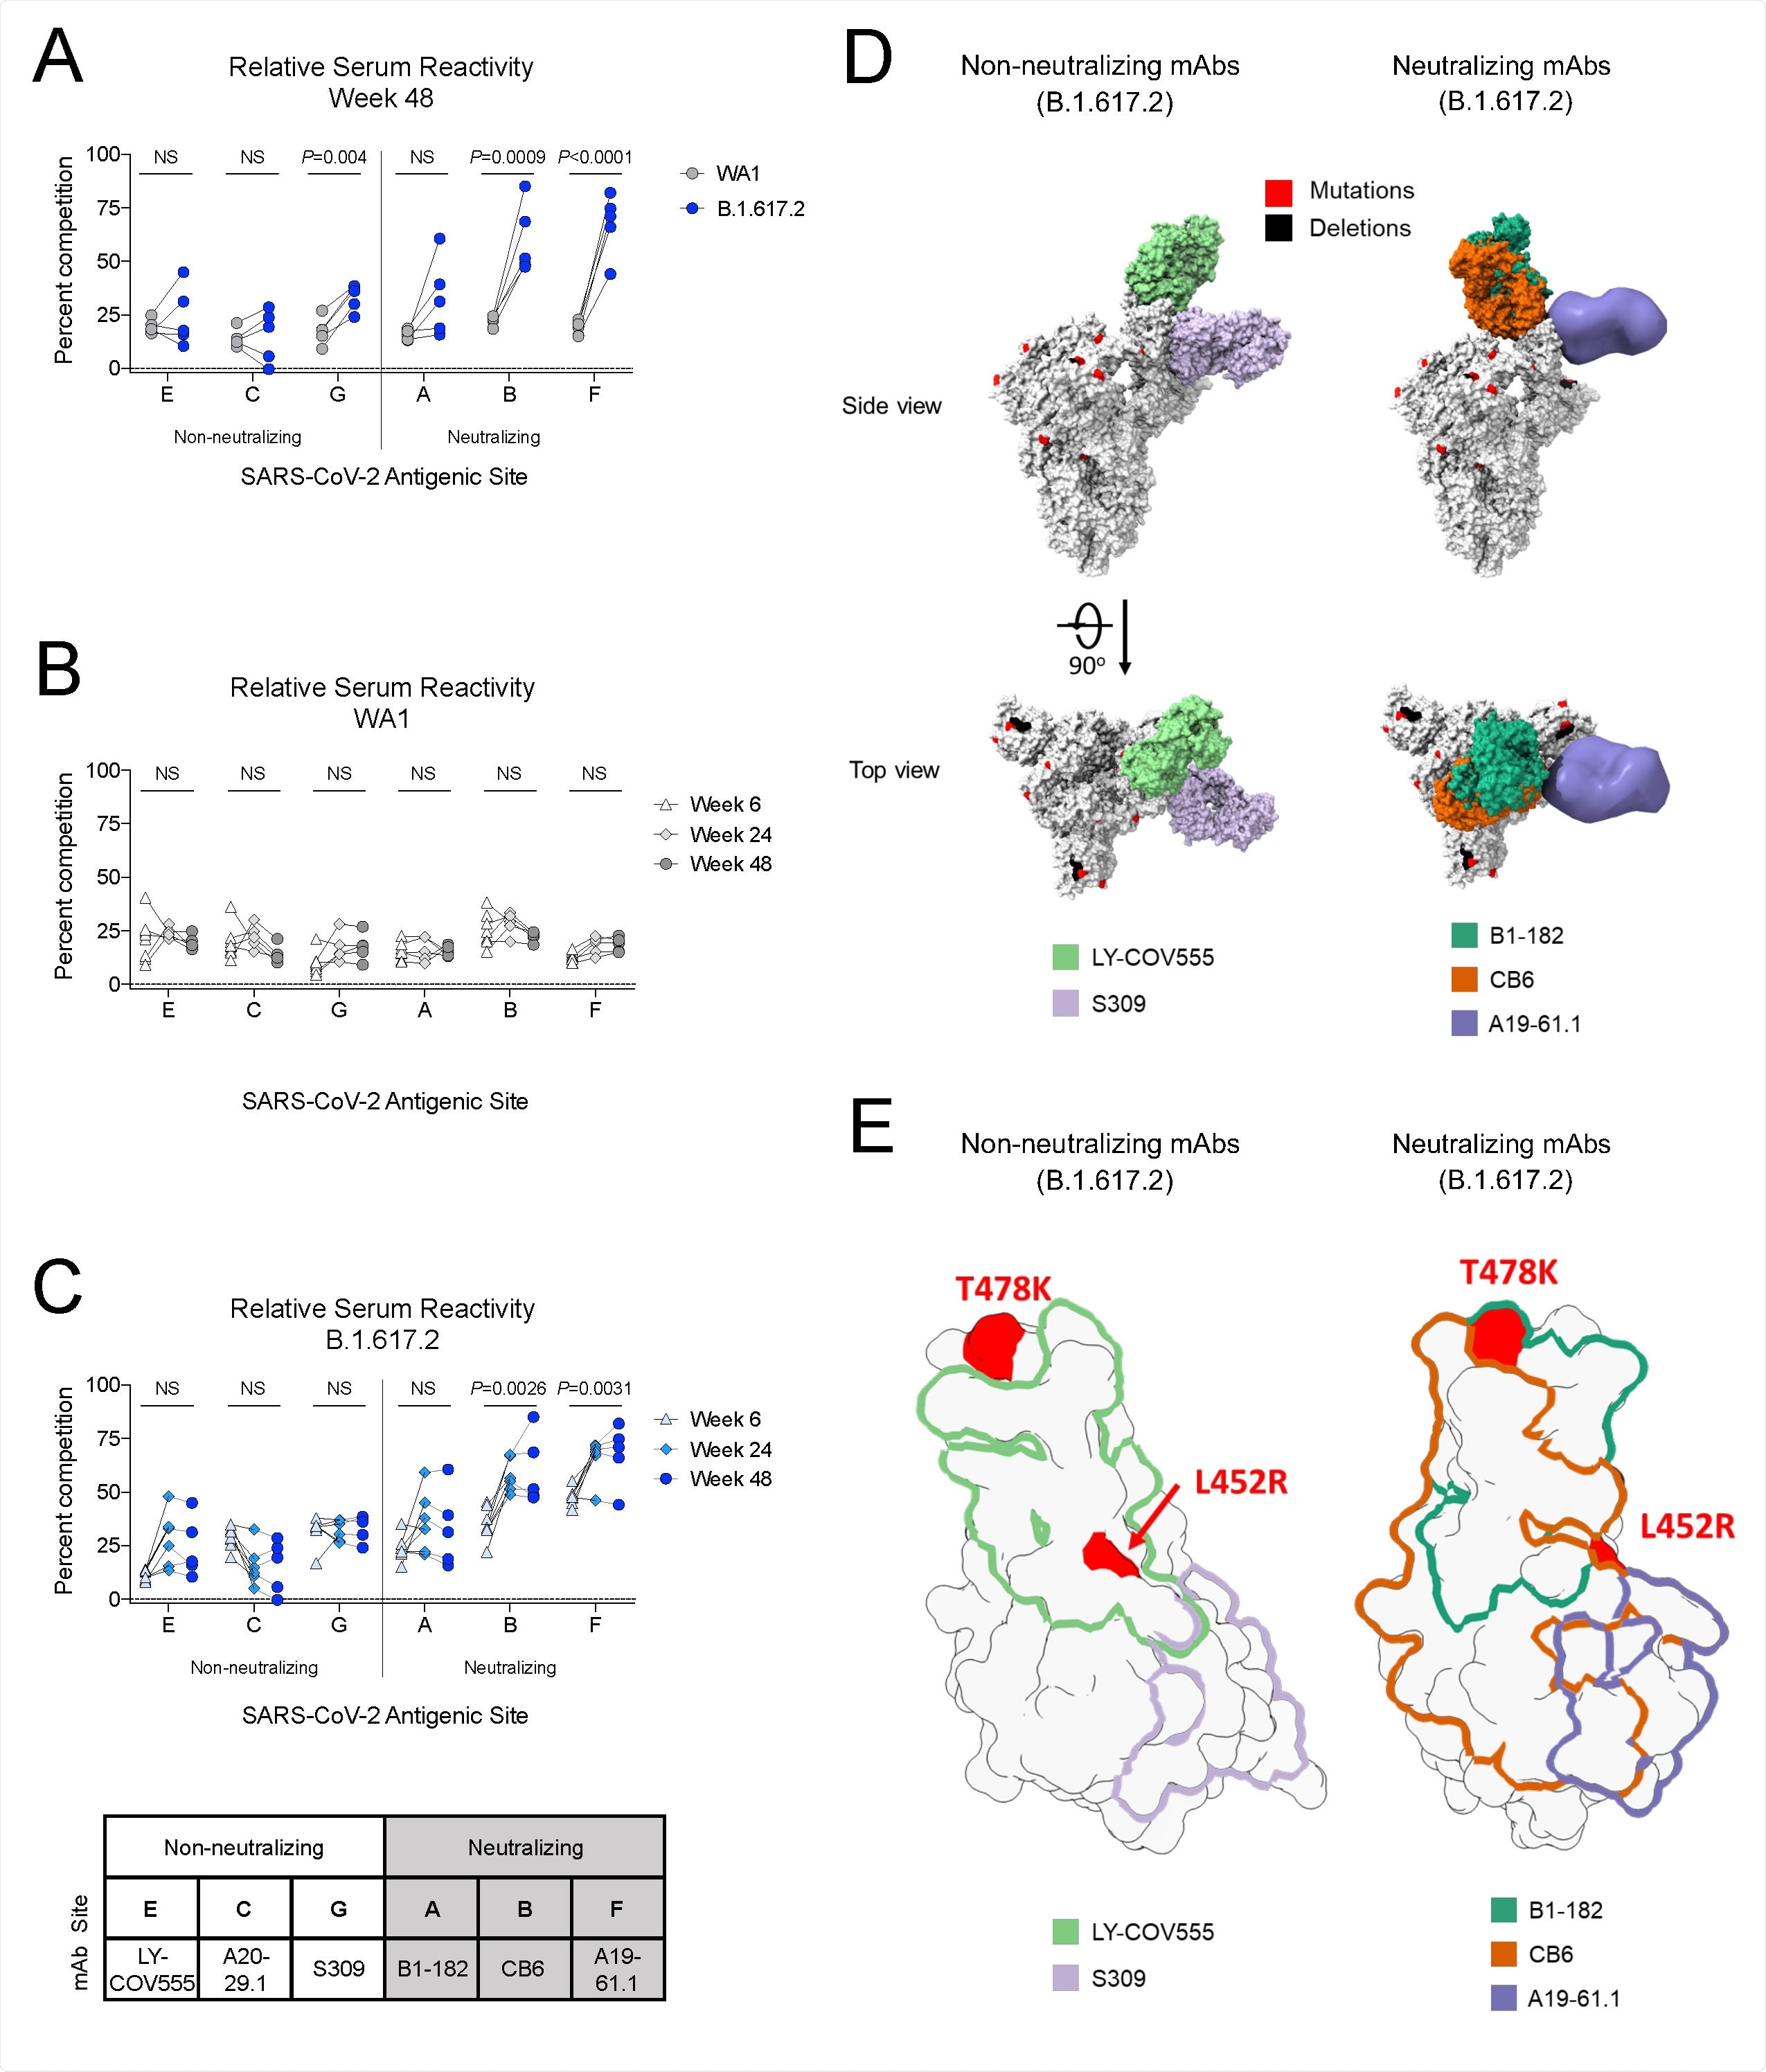 B.1.617.2 S-2P-binding serum antibodies recognize epitopes associated with neutralization (A) Relative serum reactivity was measured as percent competition of total measured serum antibody S-2P binding competed by single monoclonal antibody (mAb) targeting cross-reactive RBD epitopes on both WA1 and B.1.617.2 S-2P at Week 48 post-immunization. Antigenic sites are defined by mAbs LY-COV555 (site E), A20-29.1 (site C), S309 (site G), B1-182 (site A), CB6 (site B), and A19-61.1 (site F). 5 NHP per group. Statistical analysis shown for percent competition of binding to indicated epitopes on WA1 S-2P in comparison to B.1.617.2 S-2P. (B-C) Longitudinal analysis of relative serum reactivity to cross-reactive RBD epitopes on both WA1 (B) and B.1.617.2 S-2P (C) was evaluated at 6, 24 and 48 weeks post-immunization. 5-8 NHP per group. Statistical analysis shown for percent competition of binding to indicated epitopes at week 48 in comparison to week 6. (D) SARS-CoV-2 S models with B.1.617.2 mutations indicated in red and deletions in black shown in complex with non-neutralizing (LY-COV555, S309) and neutralizing (B1-182, CB6, A19-61.1) mAbs. (E) Footprints of both non-neutralizing (LY-COV555, S309) and neutralizing (B1-182, CB6, A19-61.1) mAbs indicate areas of binding on B.1.617.2 receptor binding domain (RBD) with mutations highlighted in red.